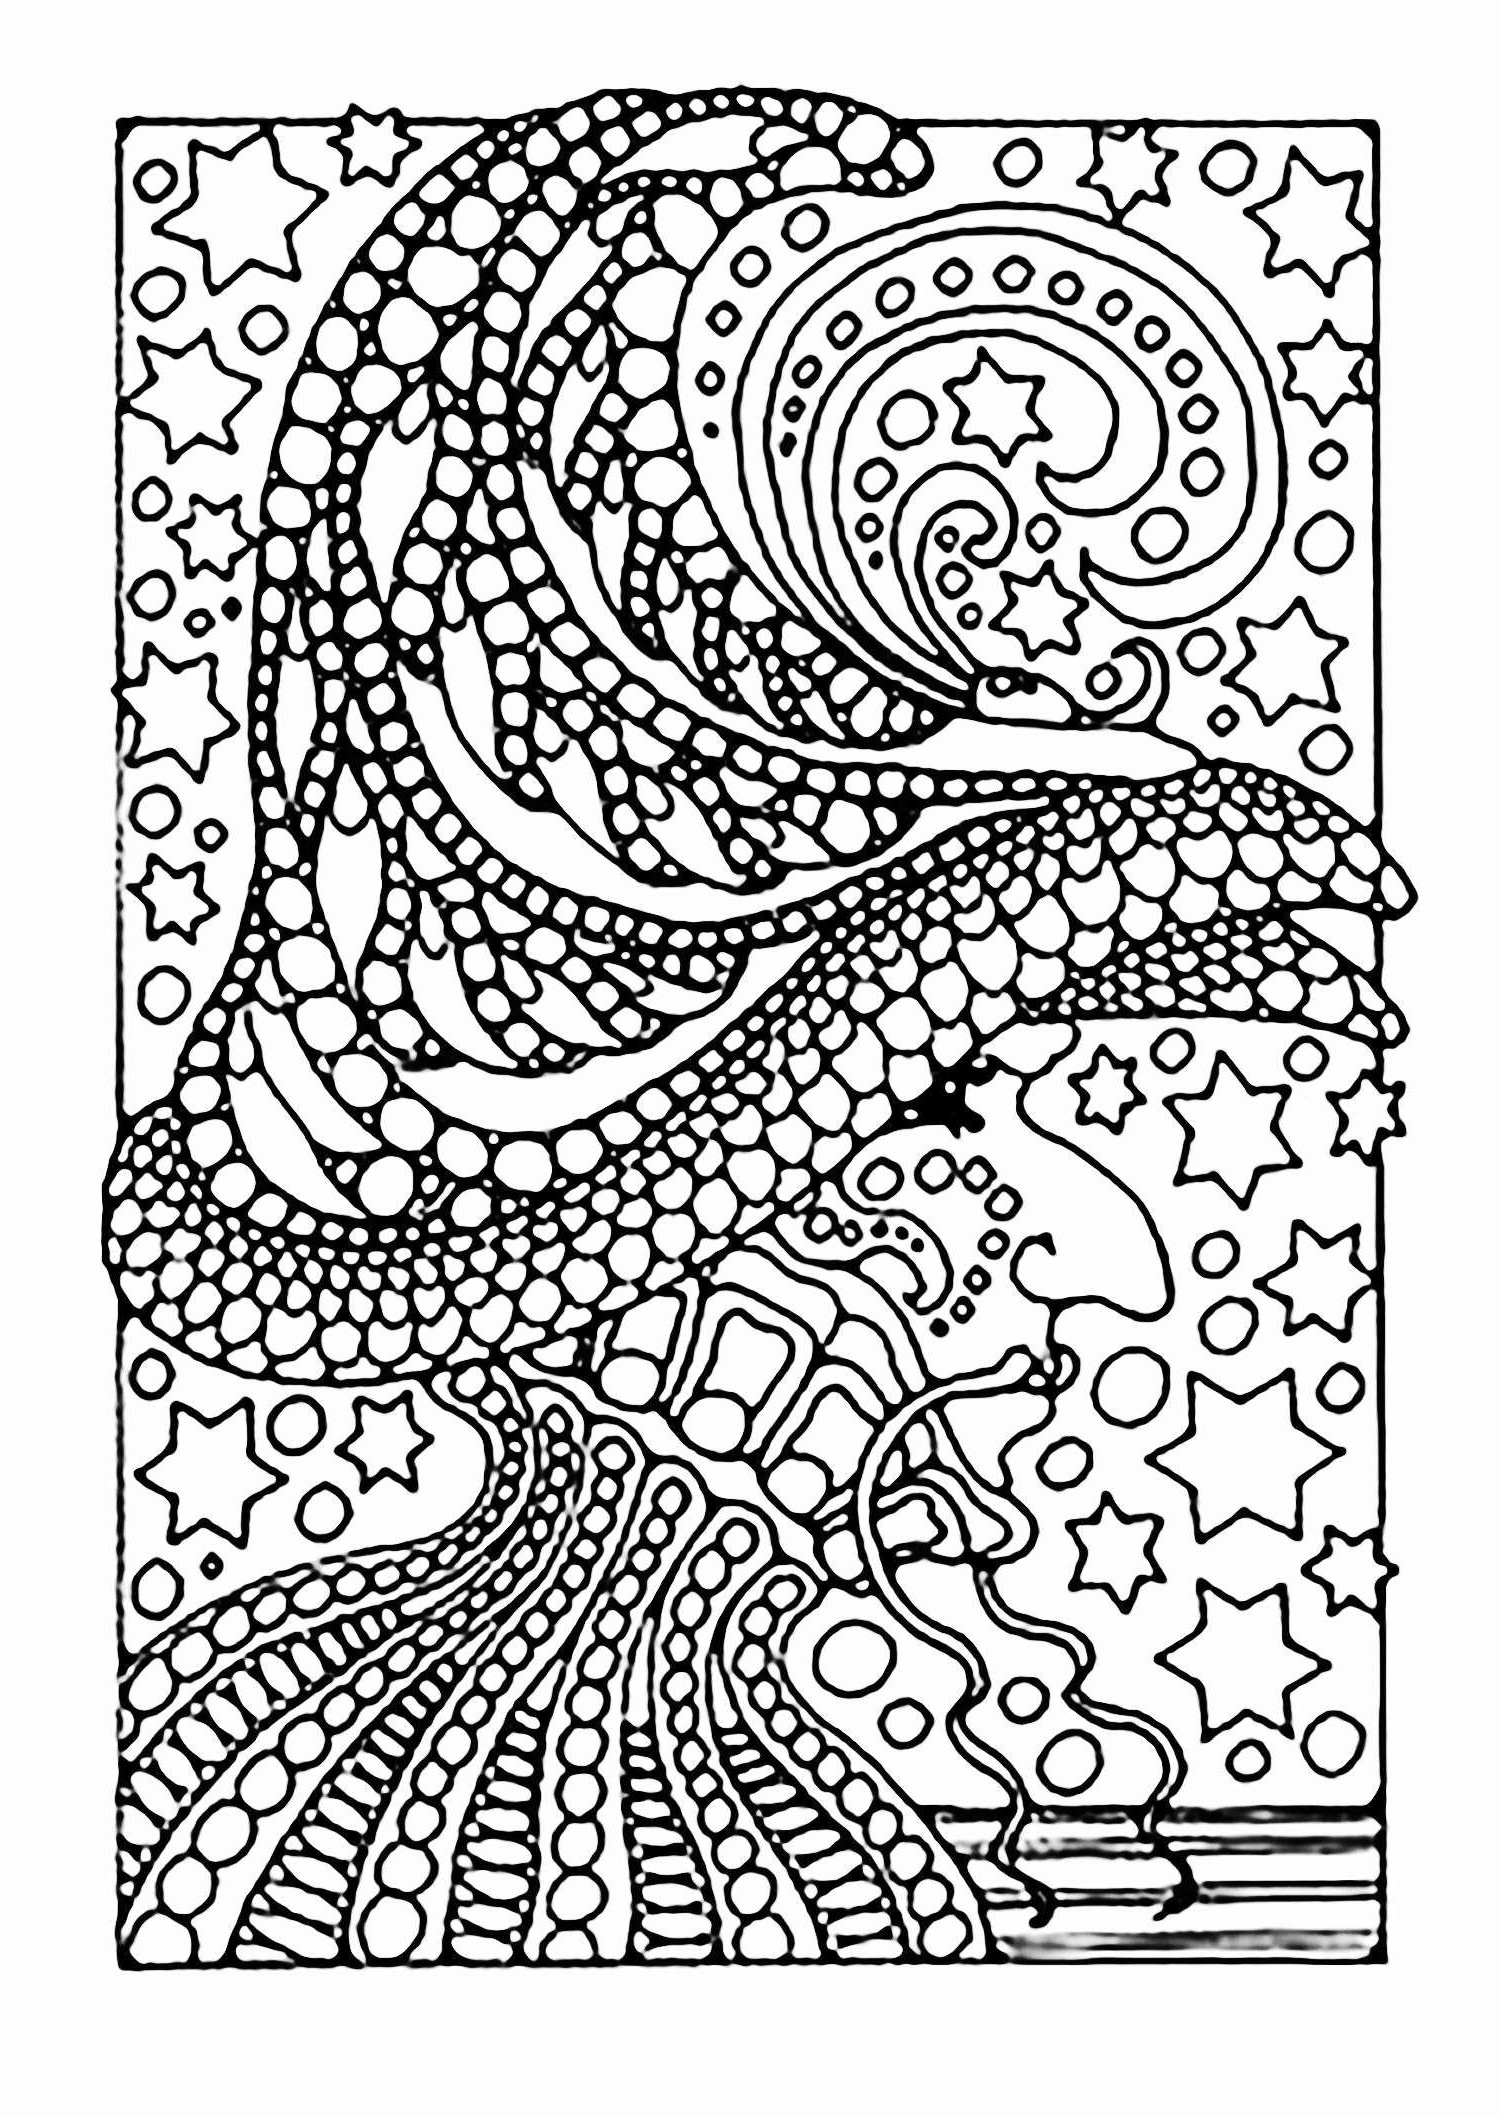 Maritime Gartengestaltung Best Of 22 Inspirational S Chinchilla Coloring Page